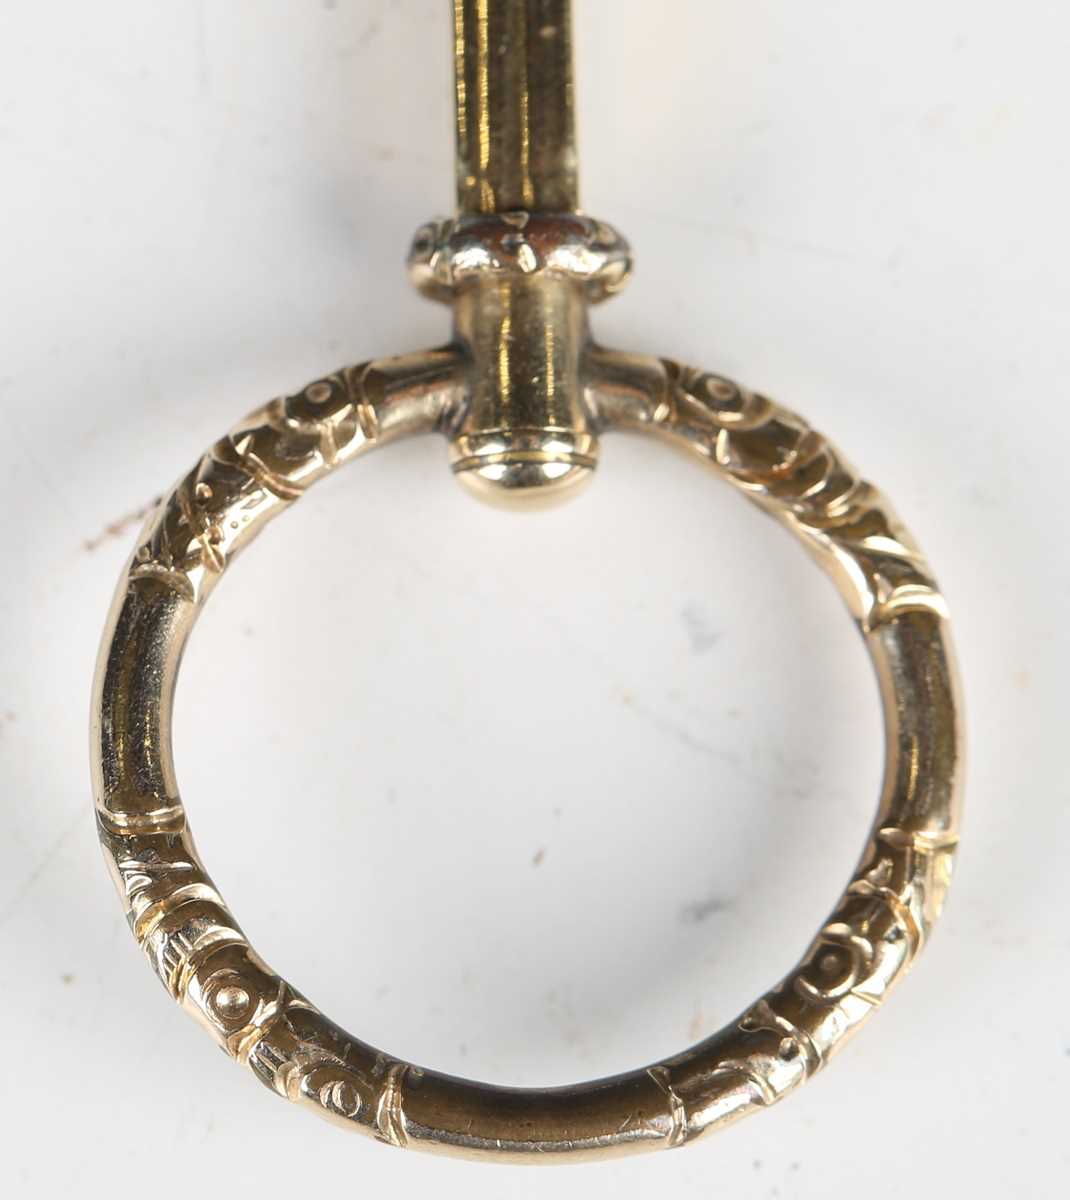 A mid-19th century gold framed magnifying lens, finely chased with foliage, length 8cm. - Image 7 of 12